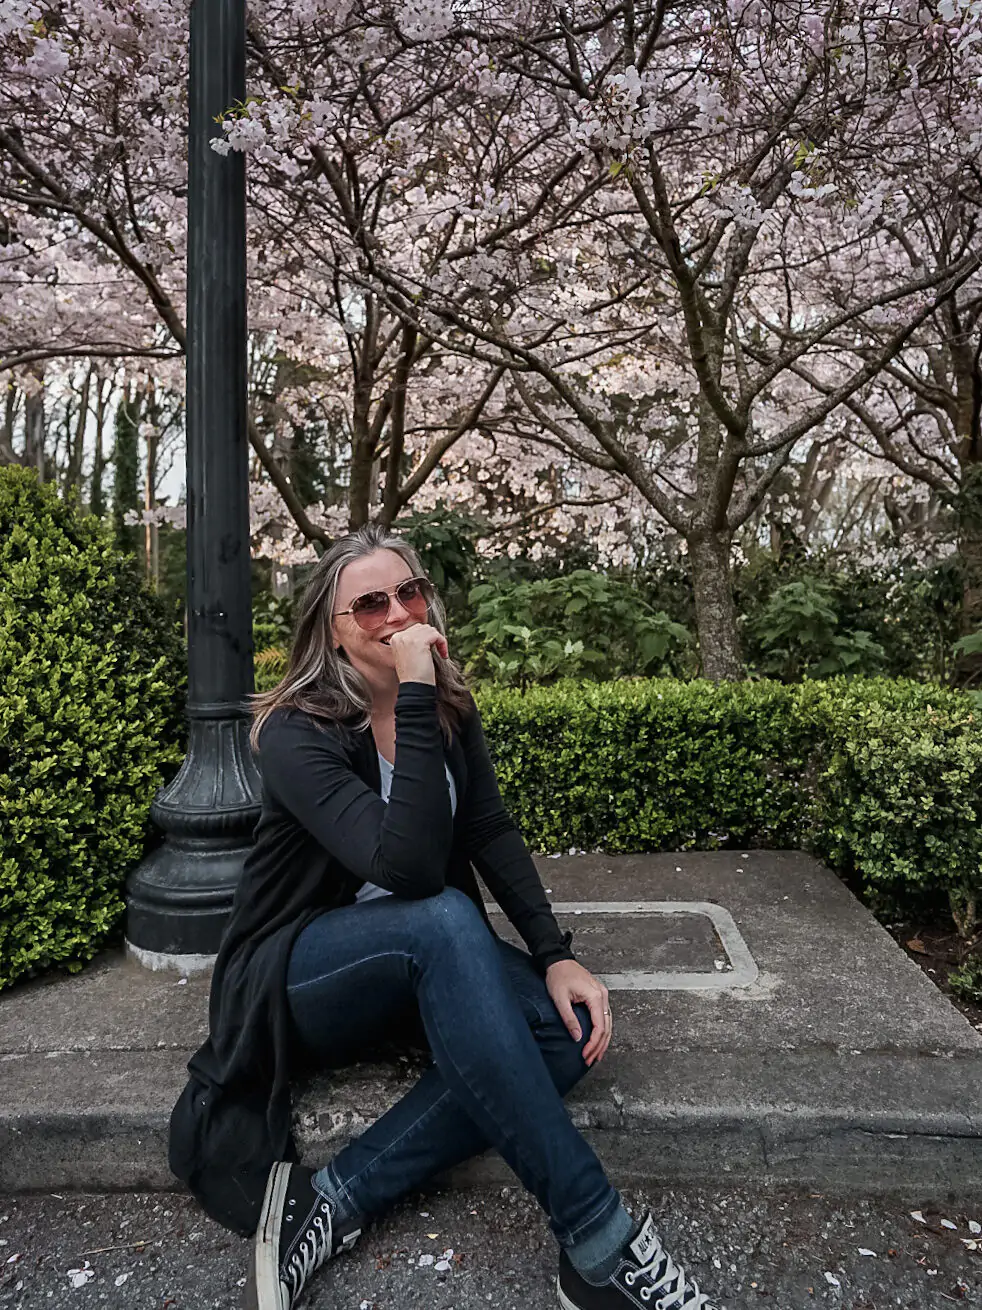 Me sitting on the ground wearing jeans and a long black sweater underneath Cherry Blossom trees during Spring in San Francisco.